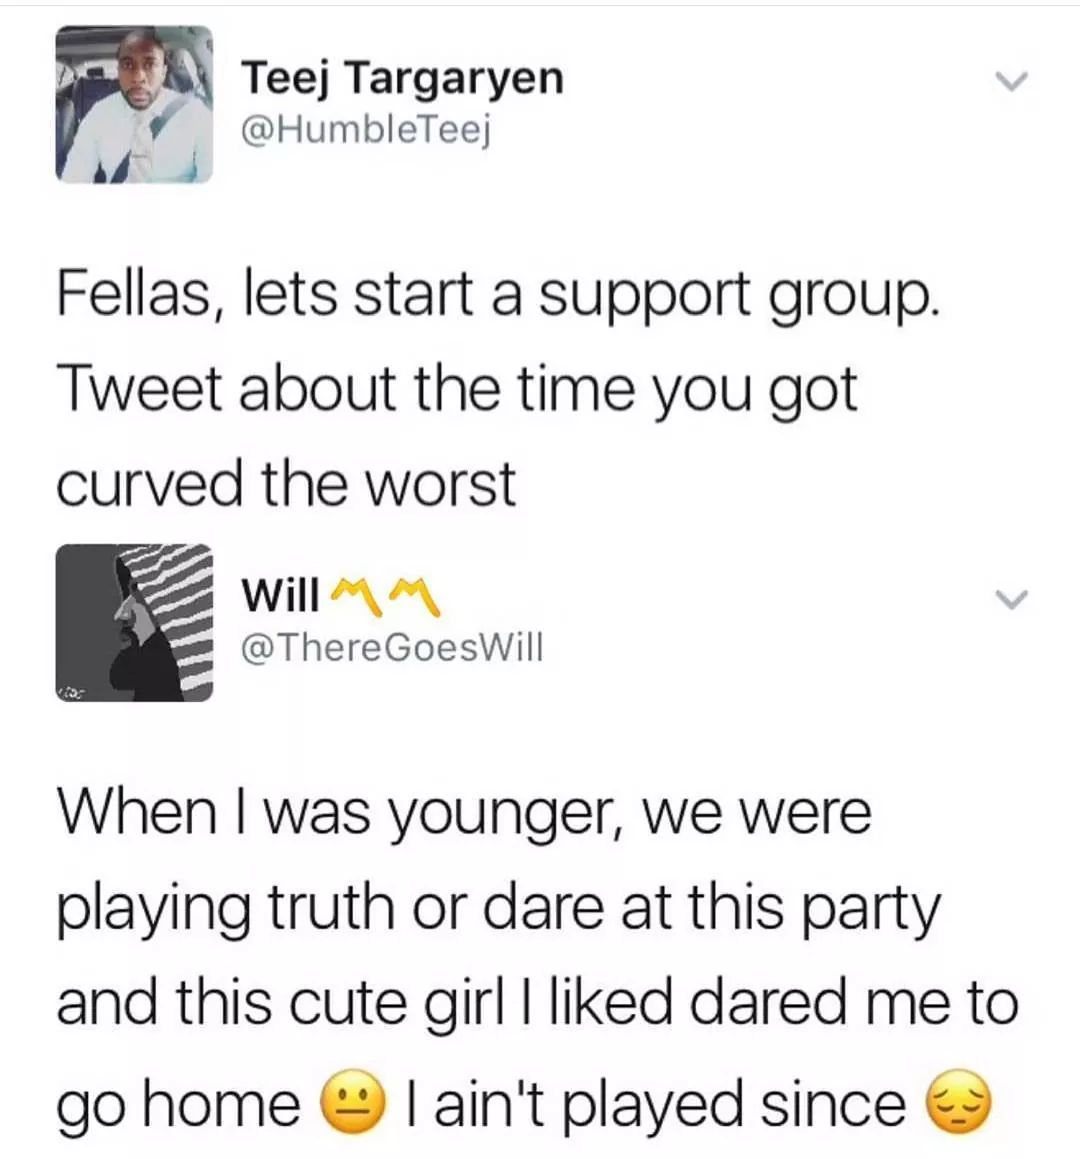 Curved meme story of guy who was playing truth or dare and girl dared him to go home.